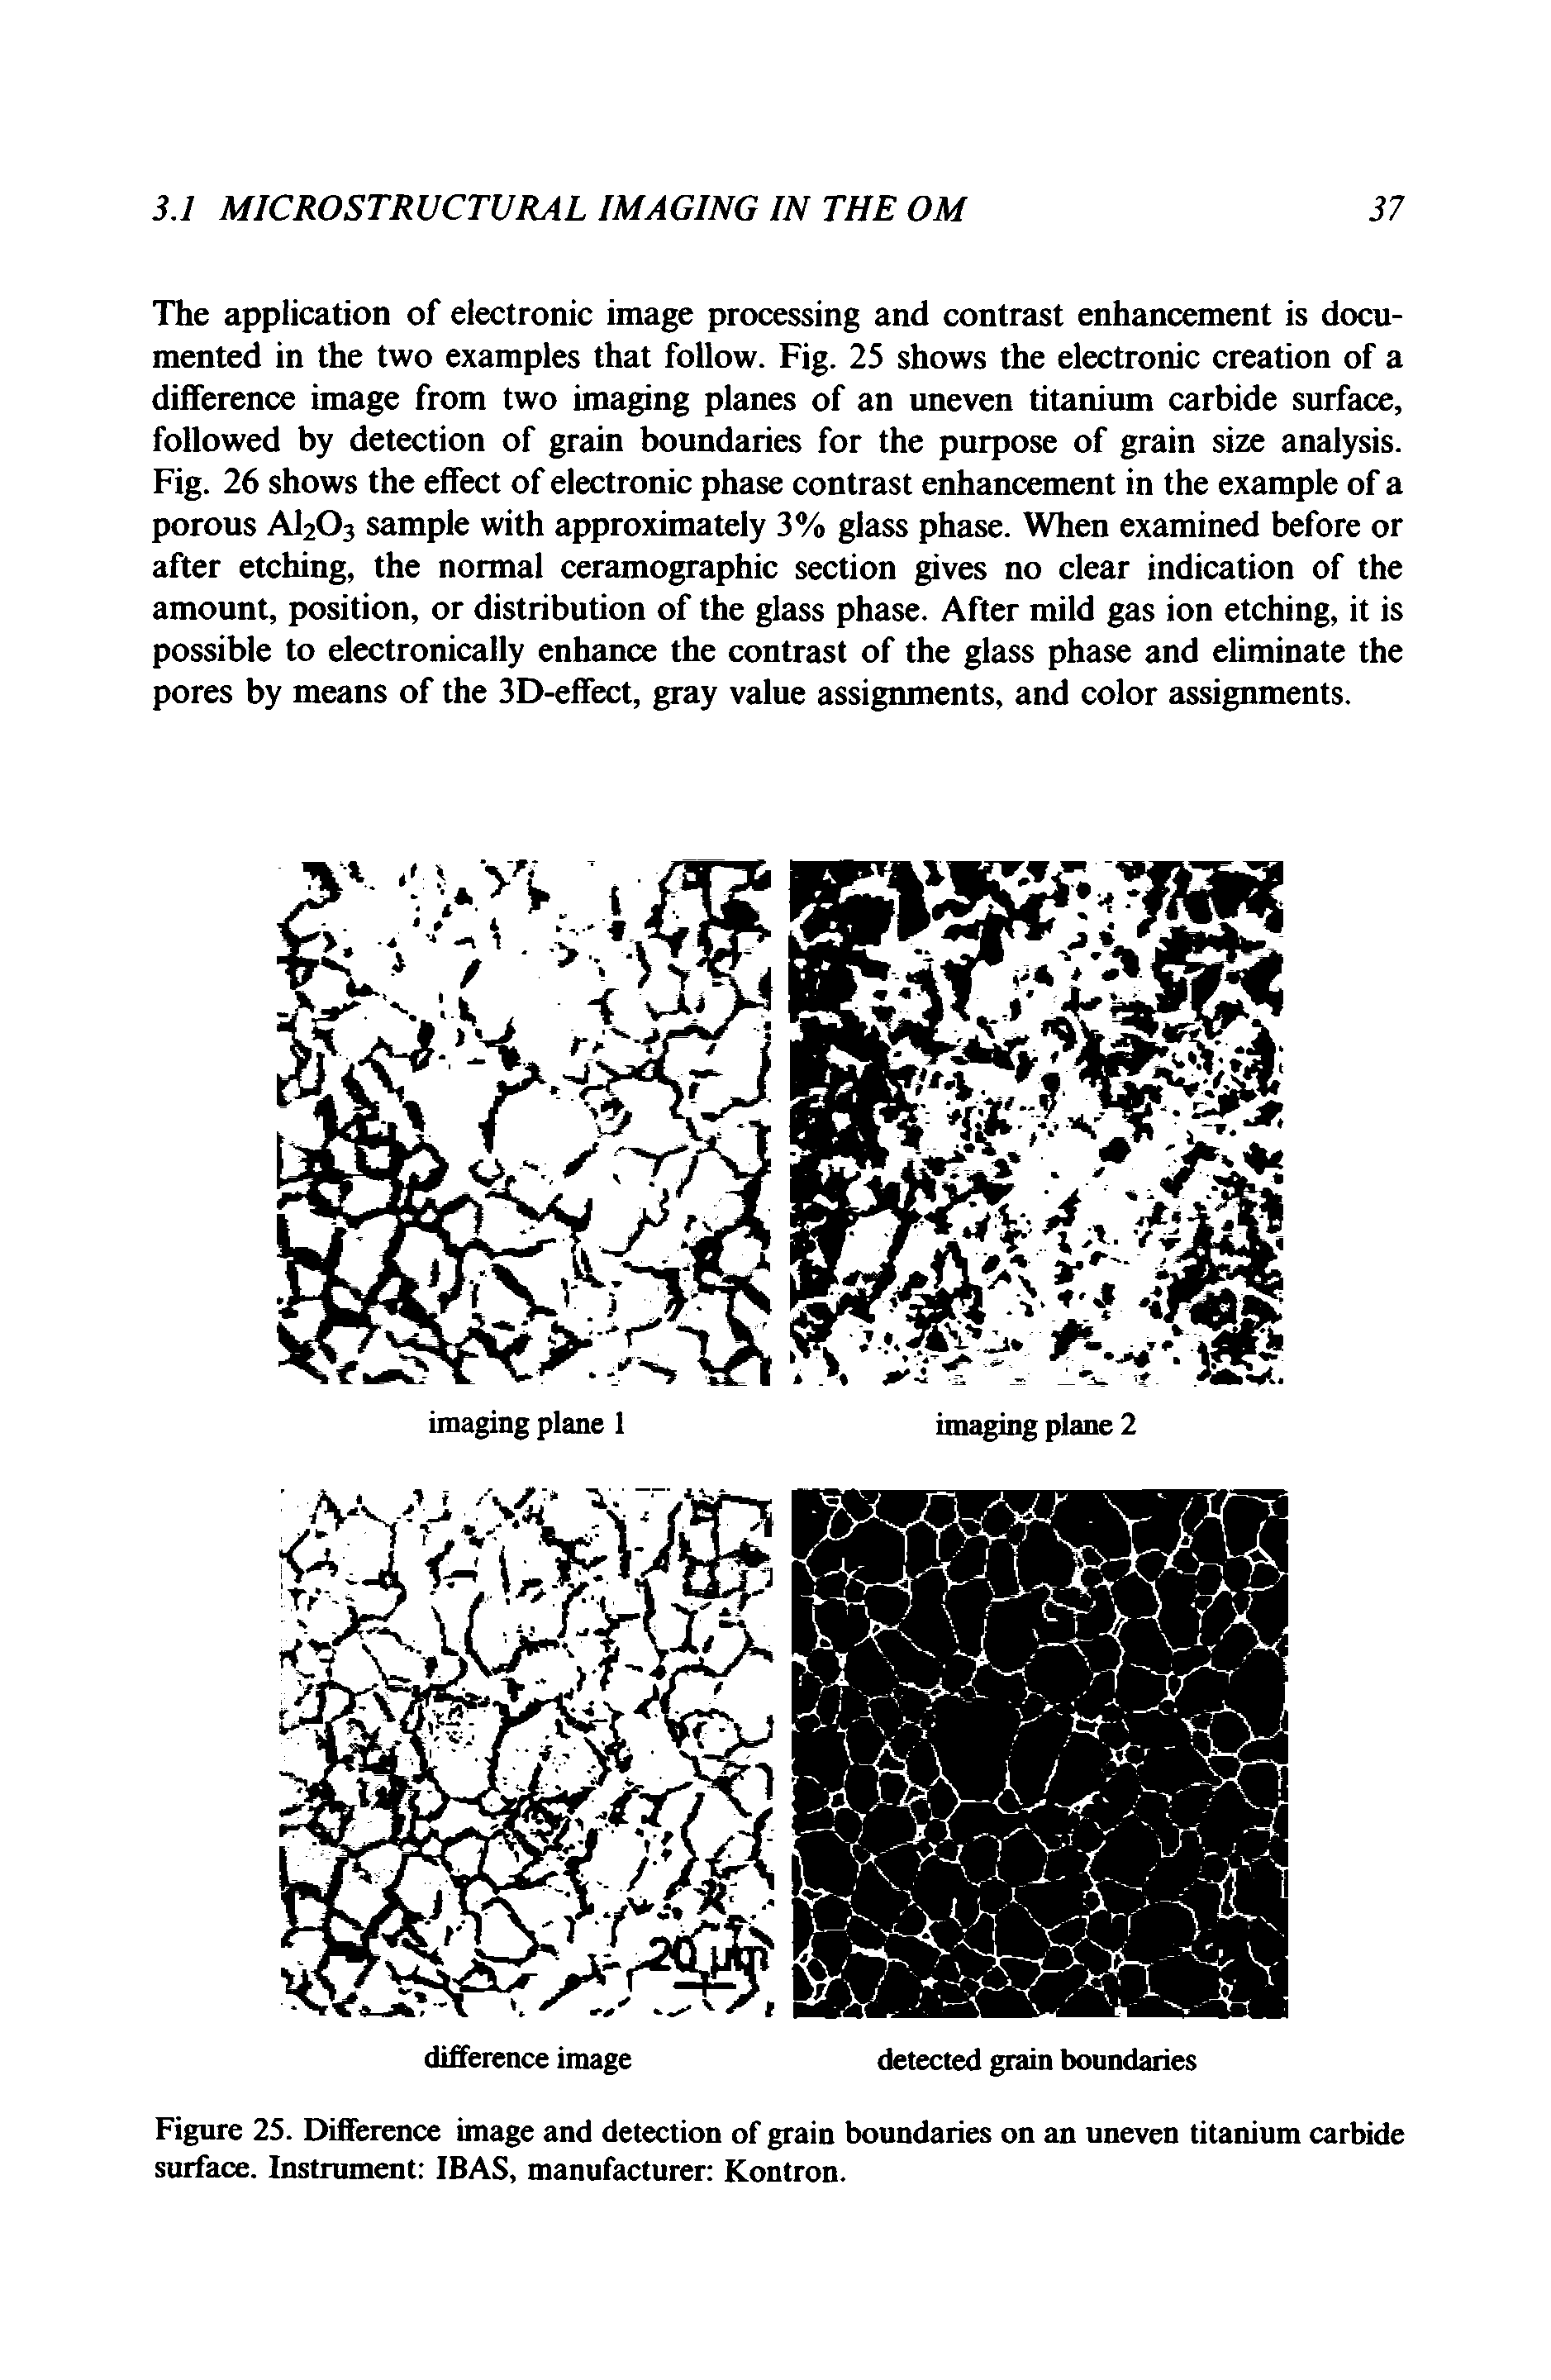 Figure 23. Difference image and detection of grain boundaries on an uneven titanium carbide surface. Instrument IBAS, manufacturer Kontron.